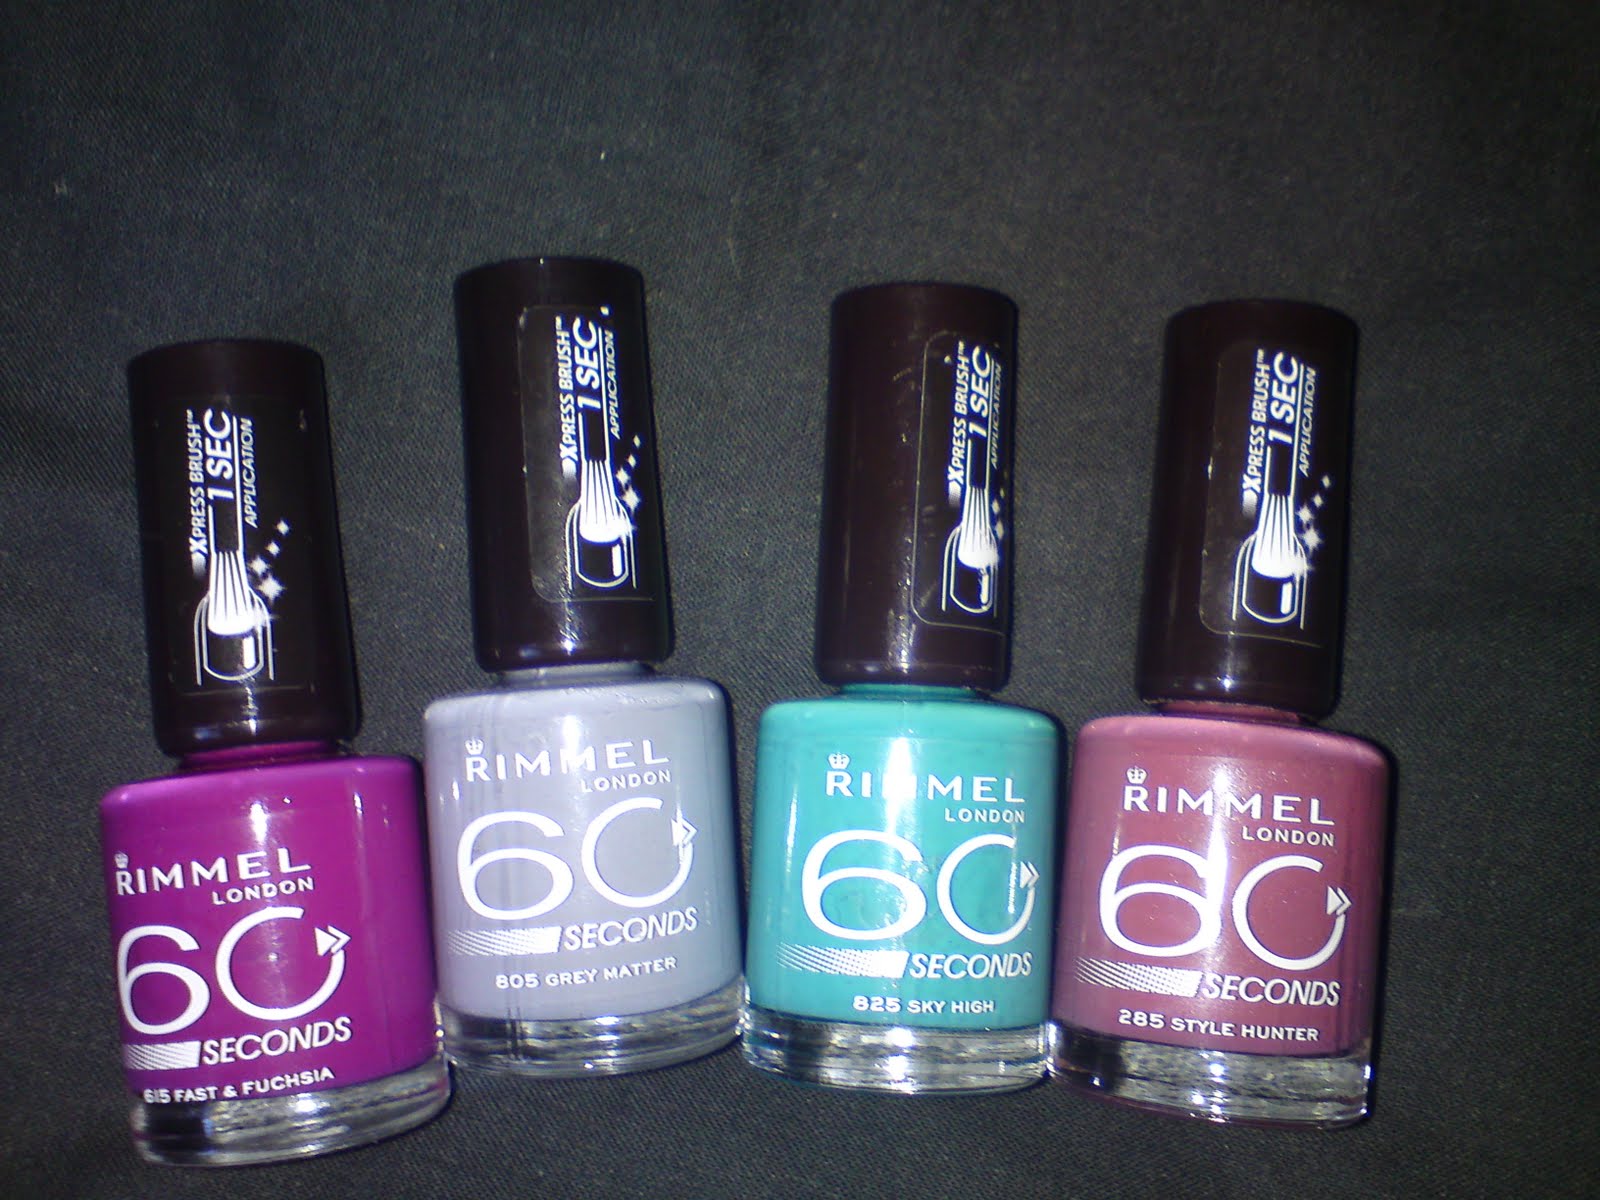 60 Second Nail Polish. As a Rimmel London VIP, I have been sent some of